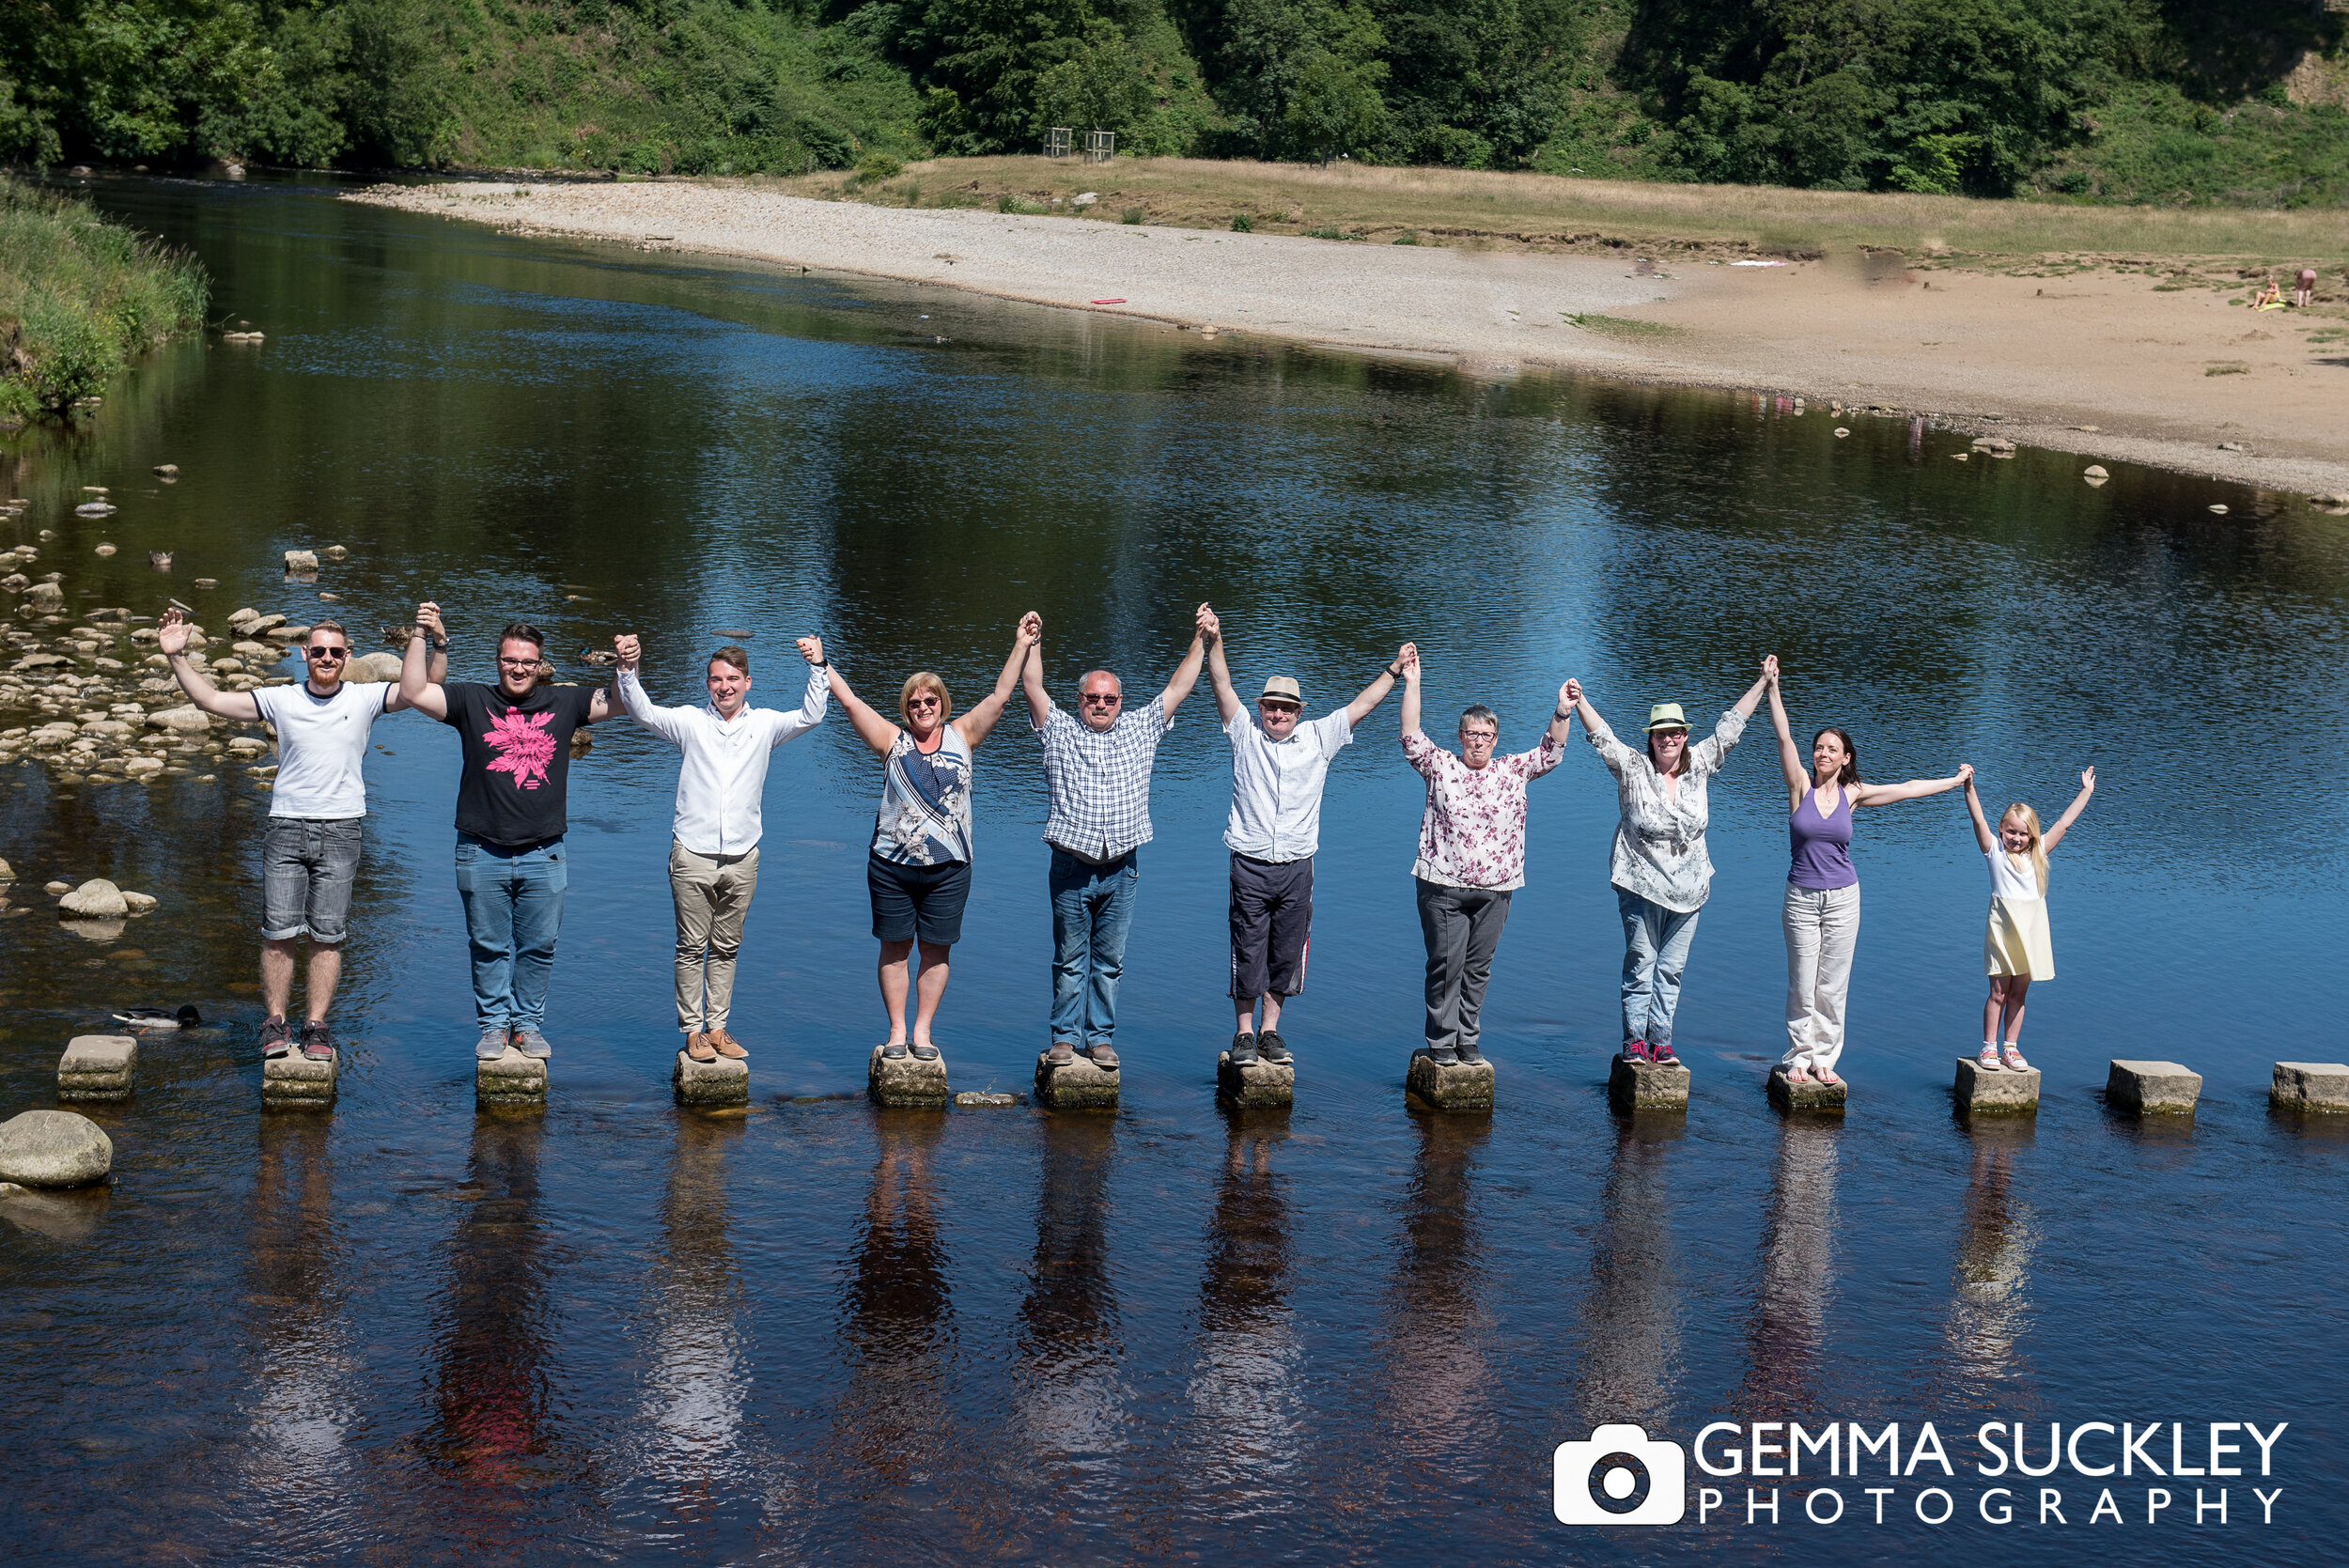  a family photo at bolton abbey on the stepping stones 